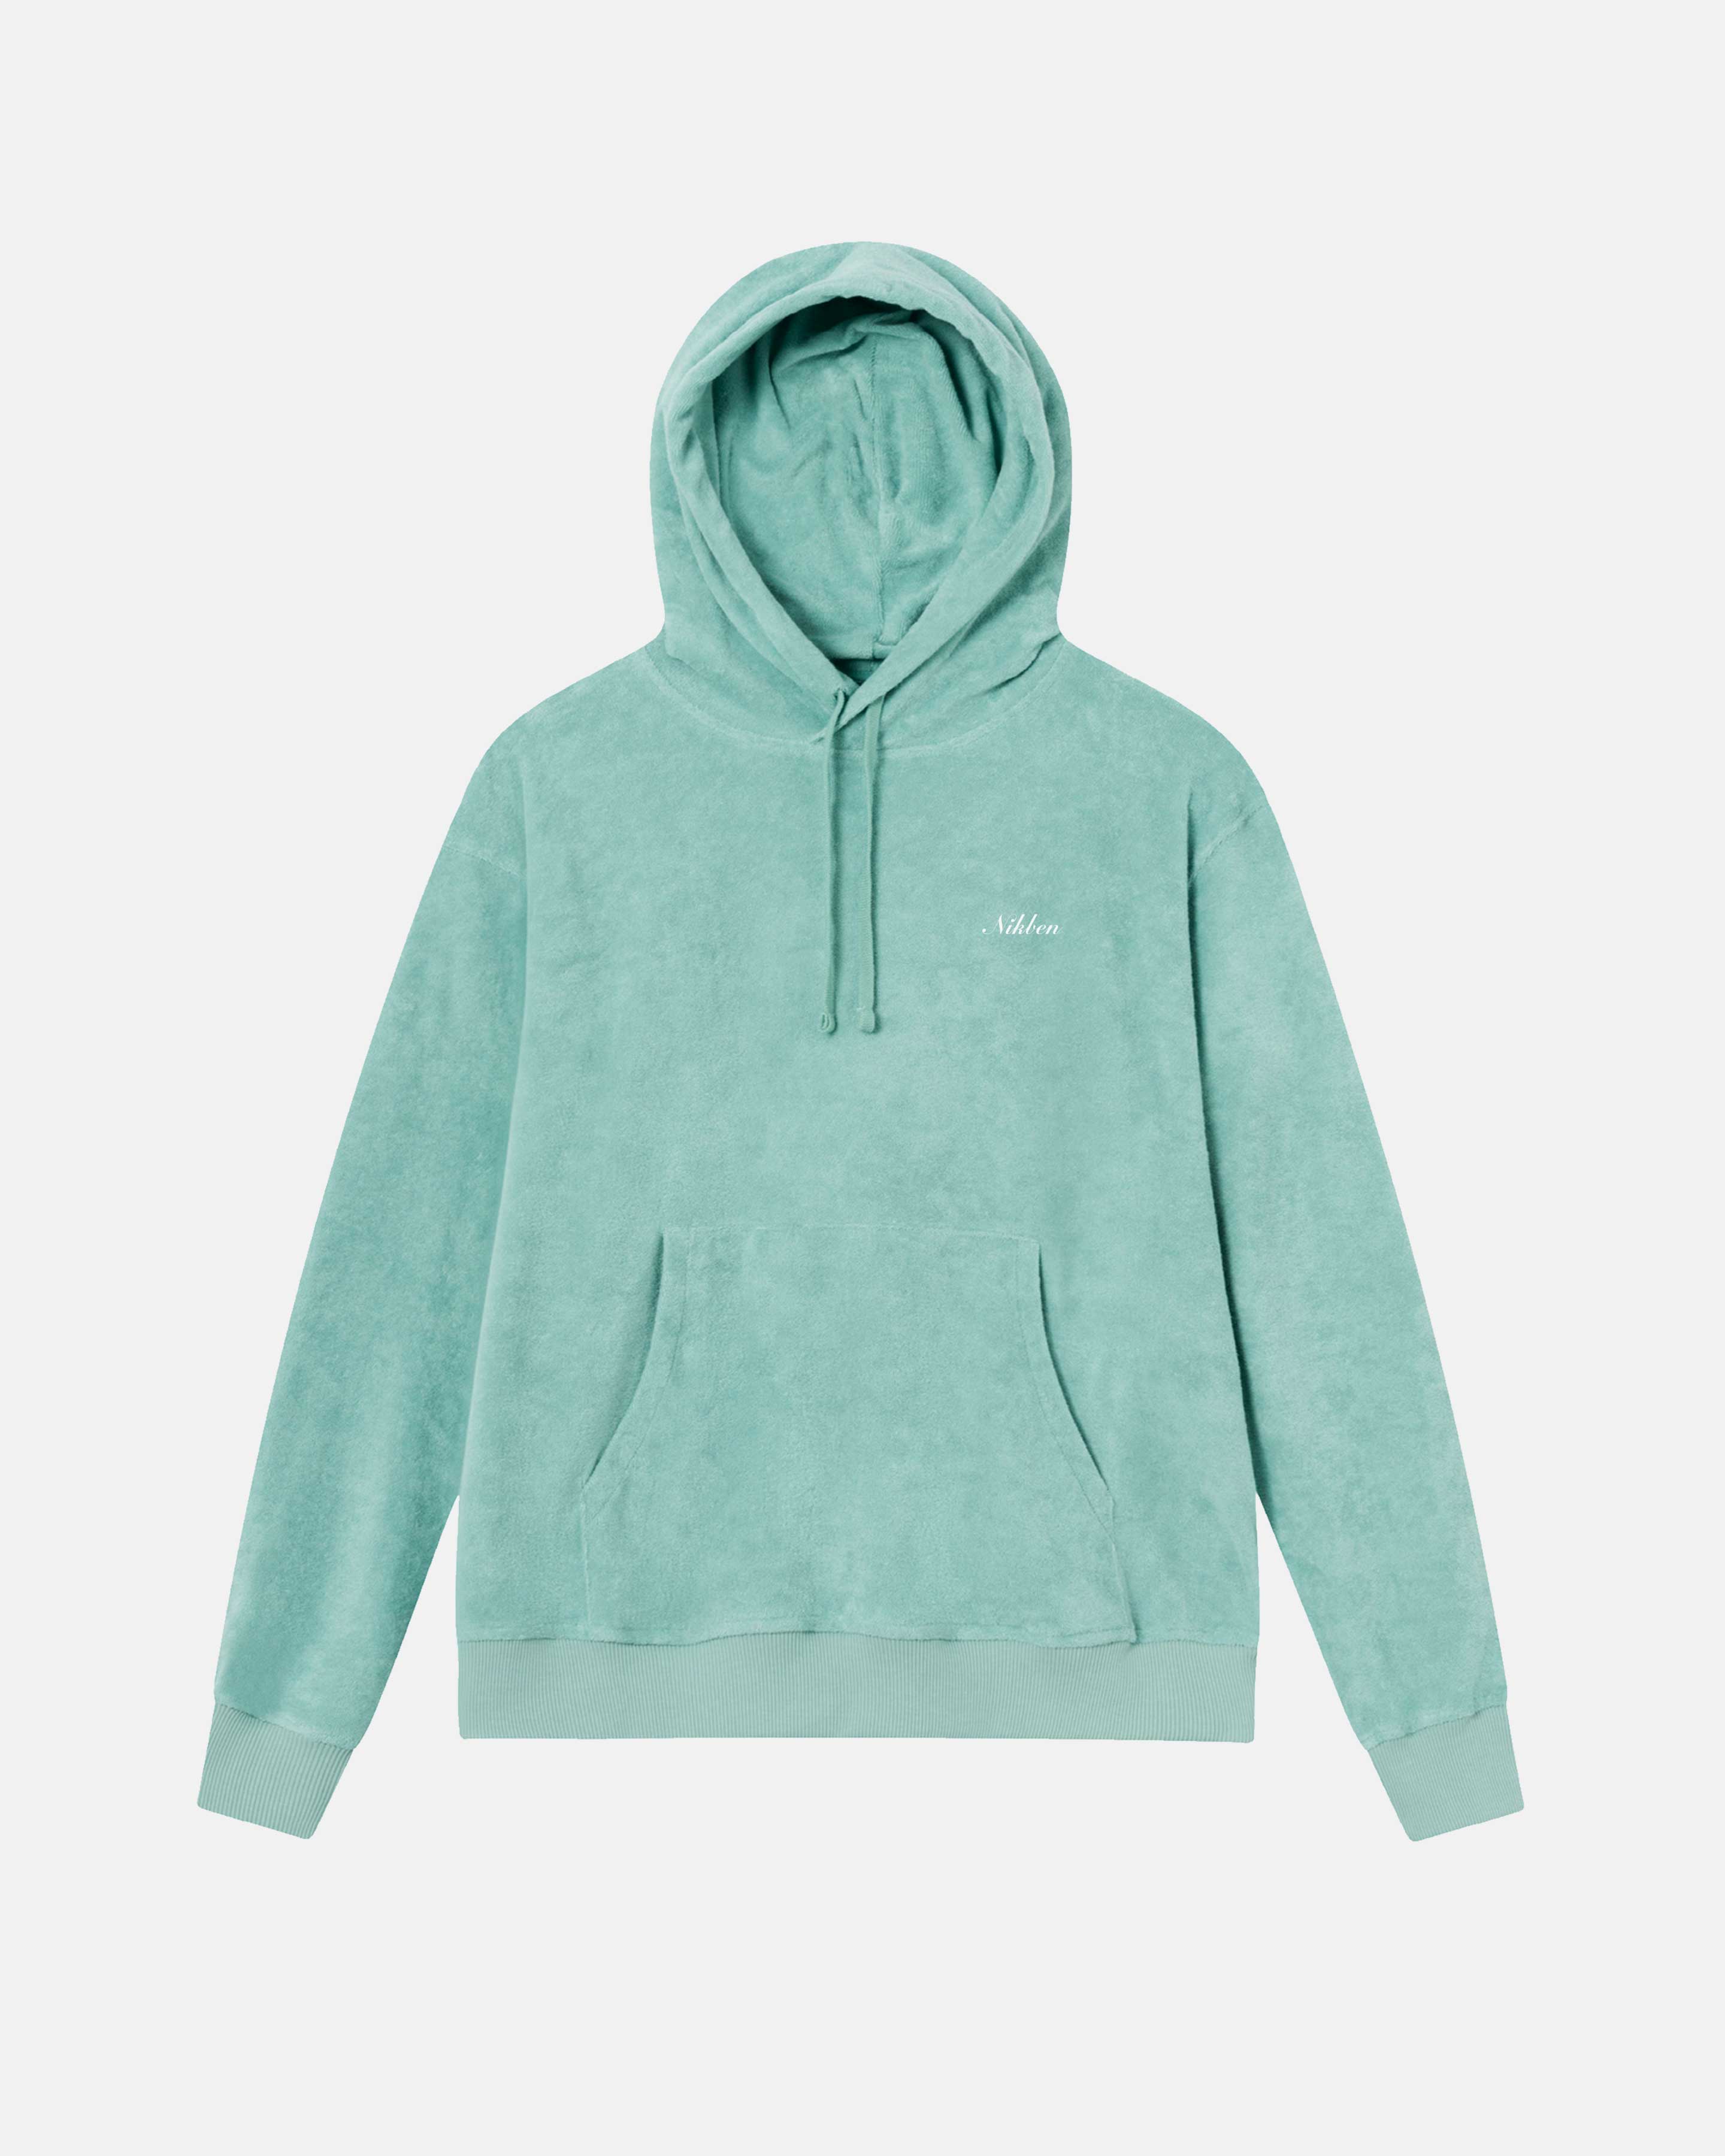 Green hoodie made from terry toweling cloth. It features drawstrings, a single front pocket, and a white embroidered "Nikben" logo on the chest